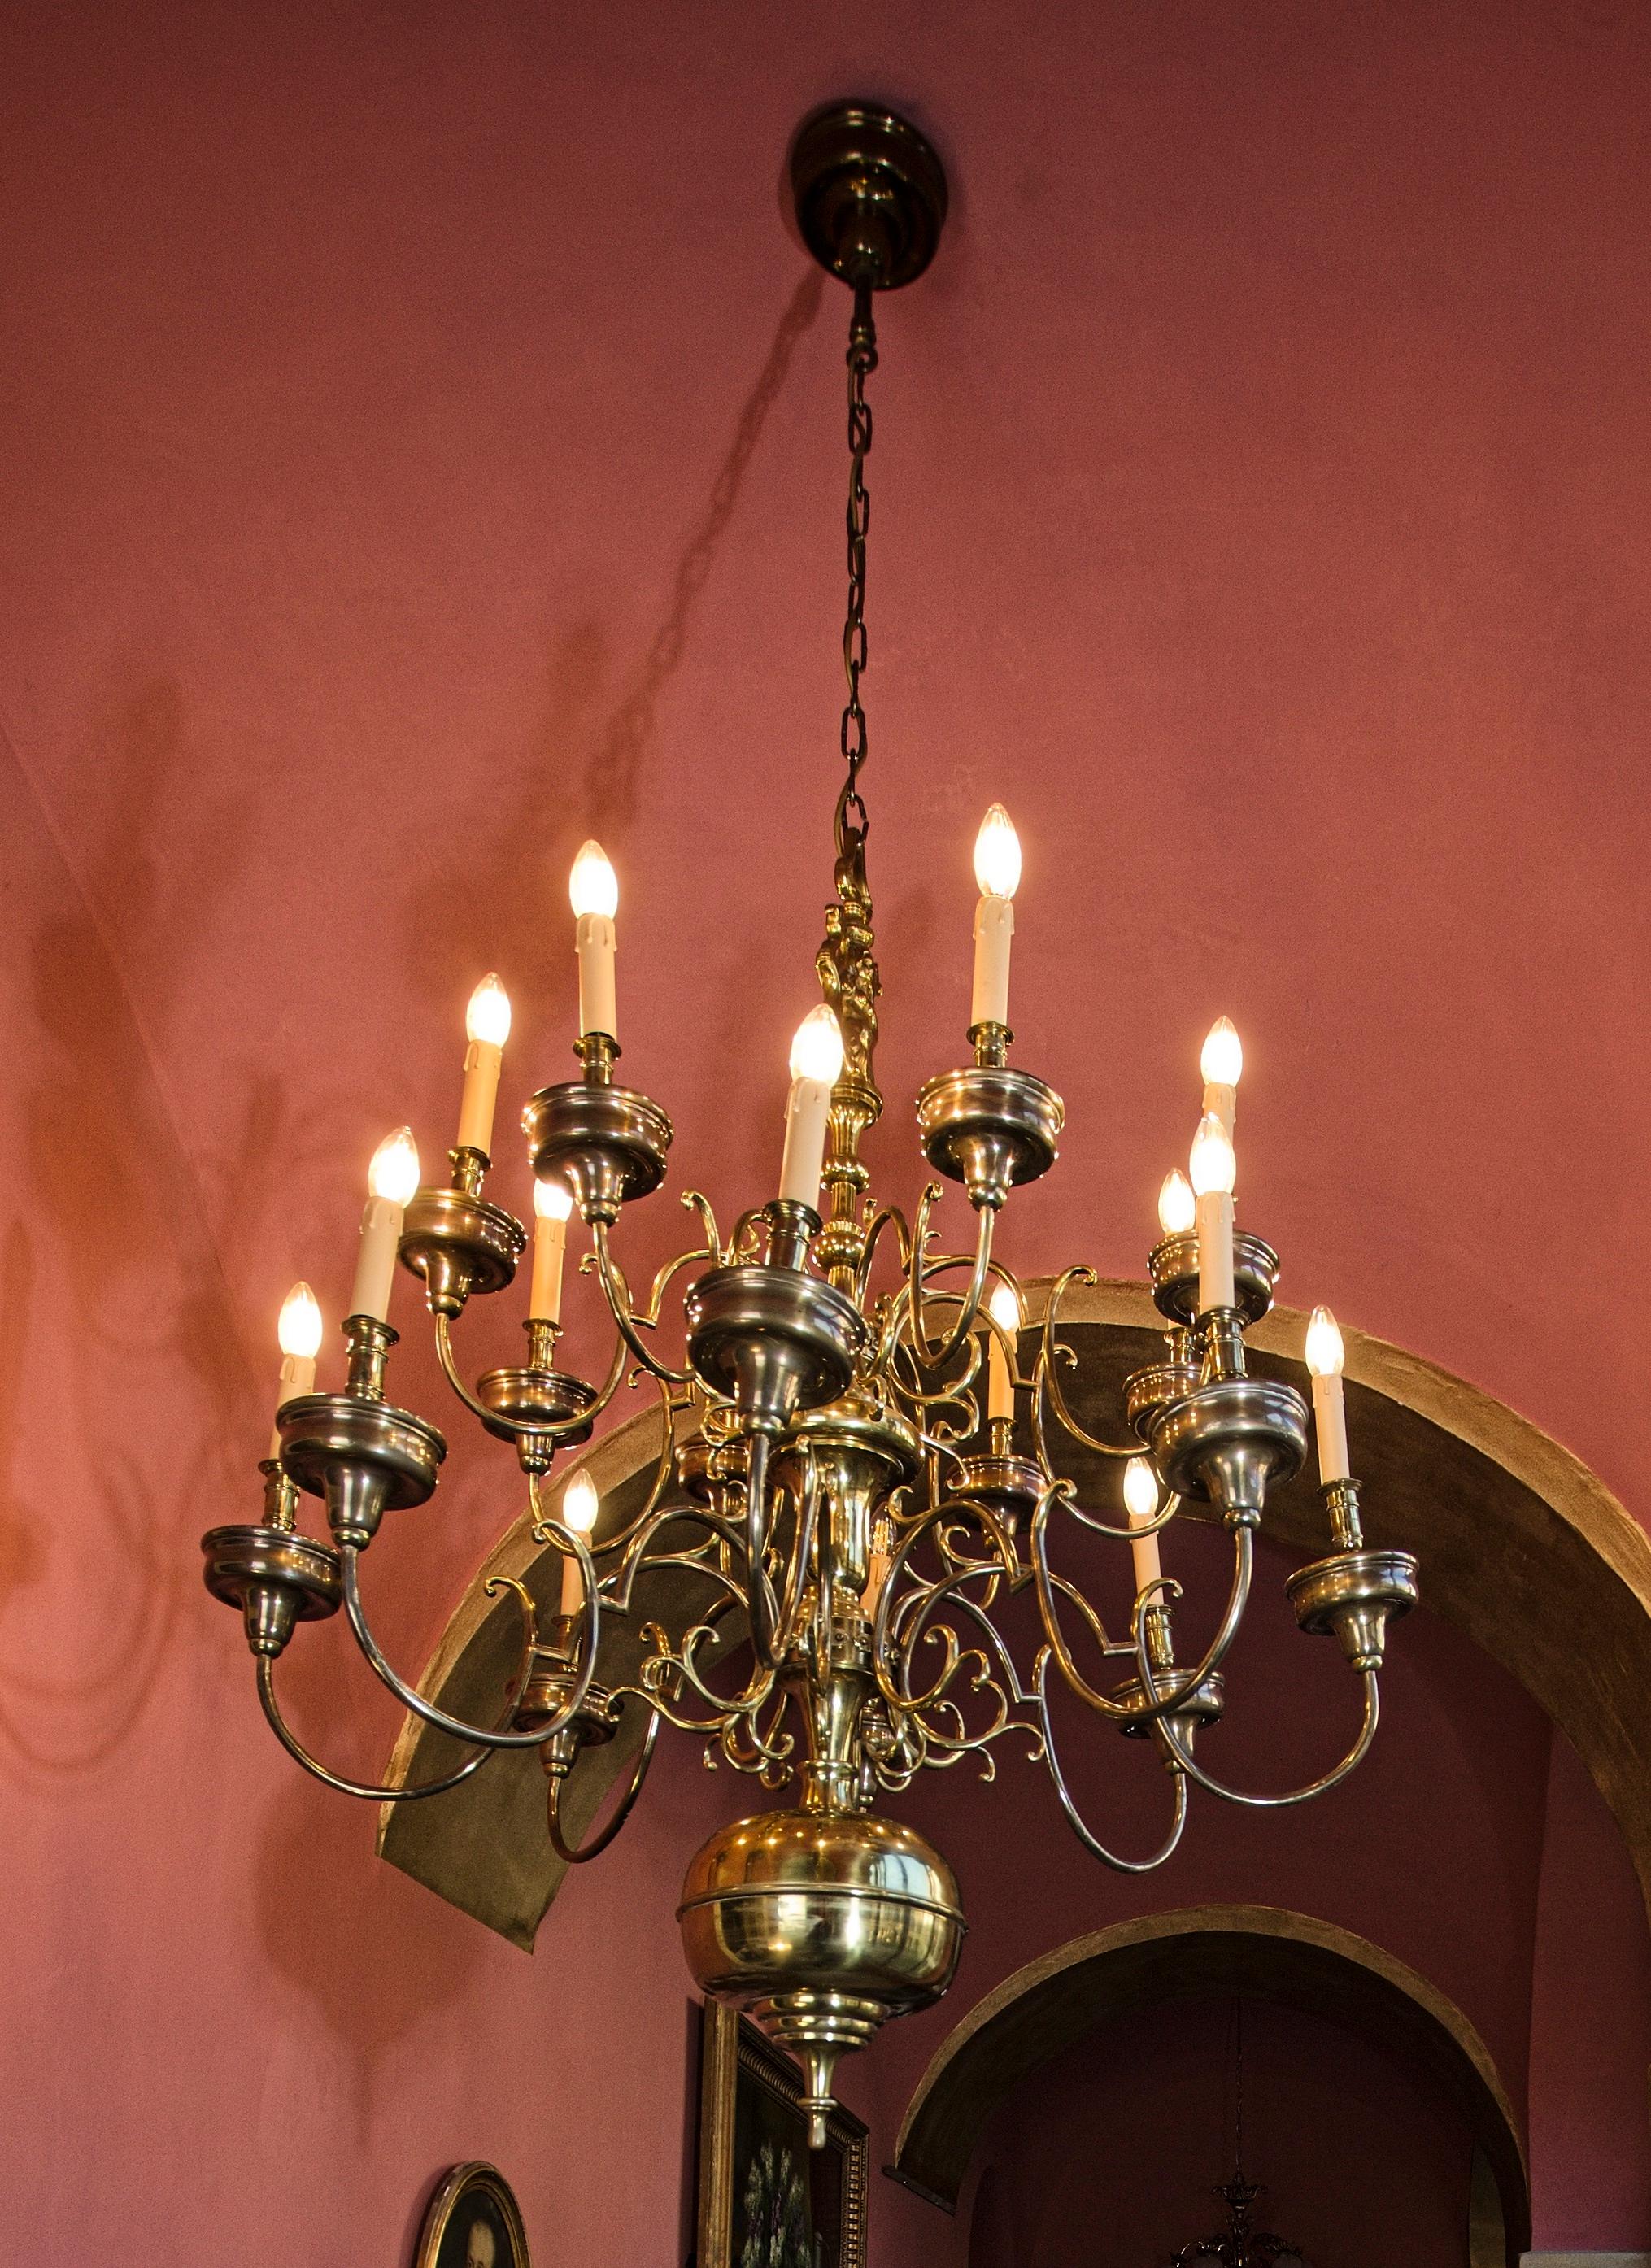 Large castle chandelier with a mermaid, 16 arms

A large Dutch style polished brass chandelier with a mermaid. Sixteen-arm design in two floors. Condition: the chandelier is after renovation of the electrical installation: new supply cable, new